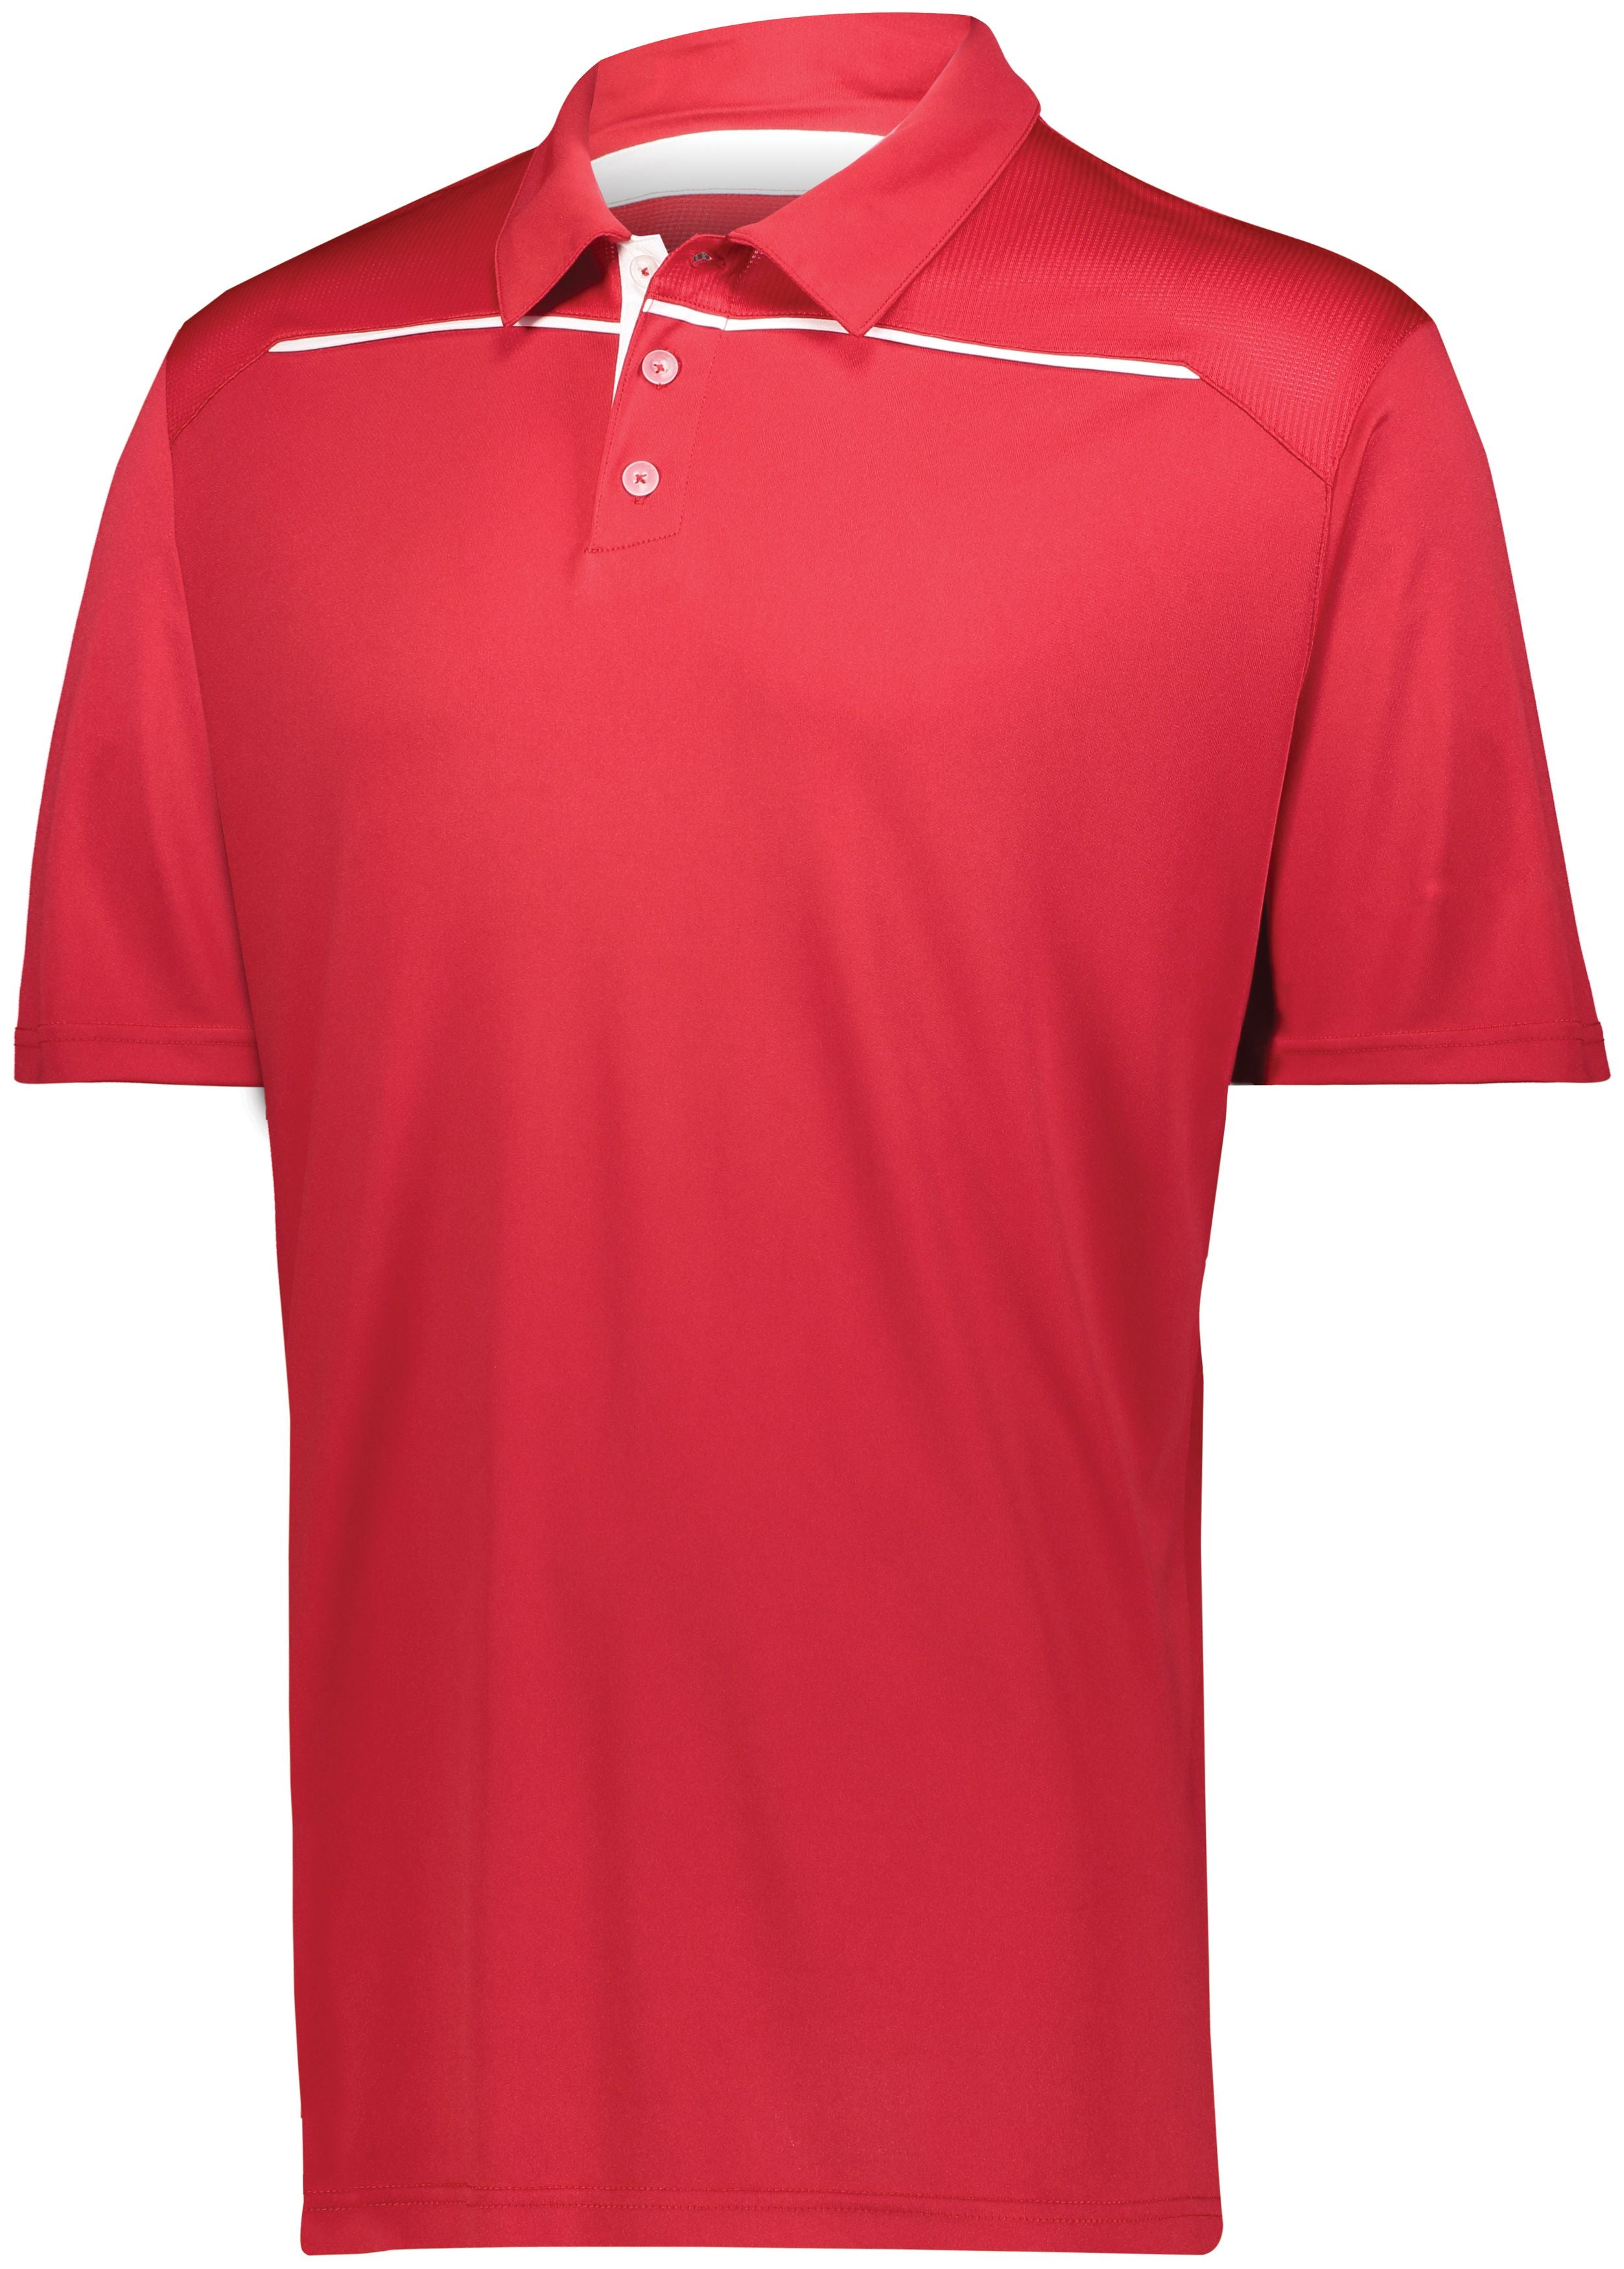 Holloway Defer Polo in Scarlet/White  -Part of the Adult, Adult-Polos, Polos, Holloway, Shirts product lines at KanaleyCreations.com